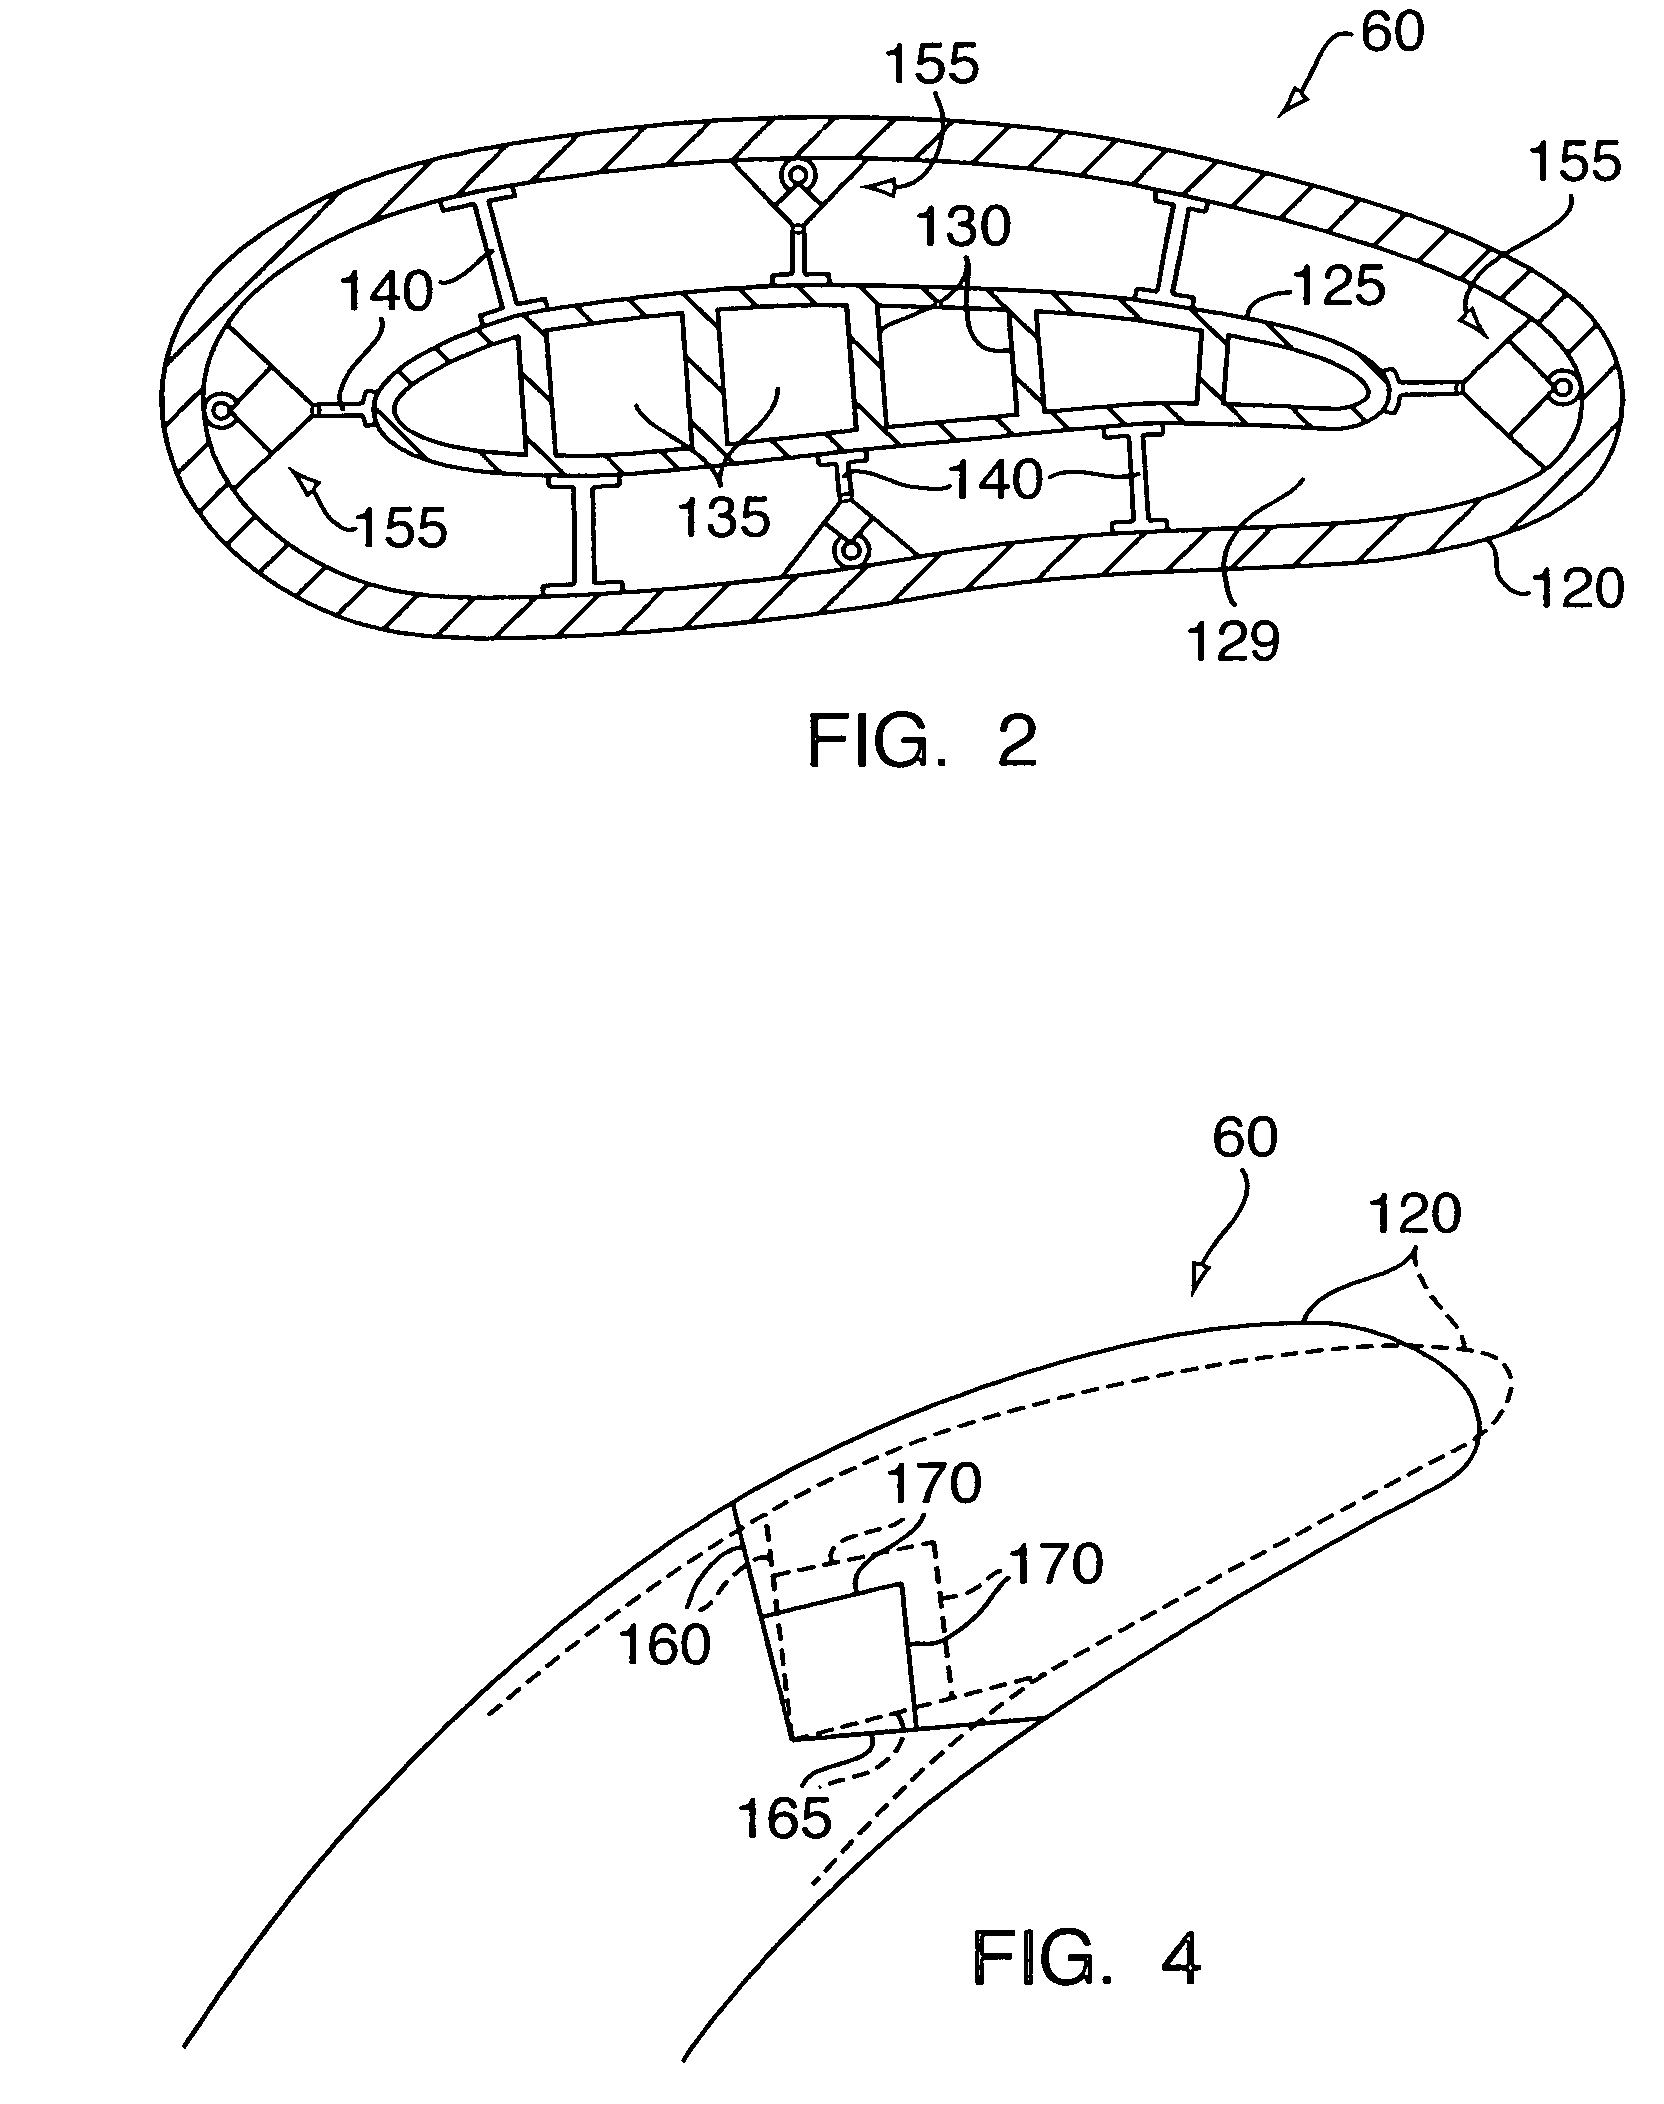 Variable geometry guide vane for a gas turbine engine